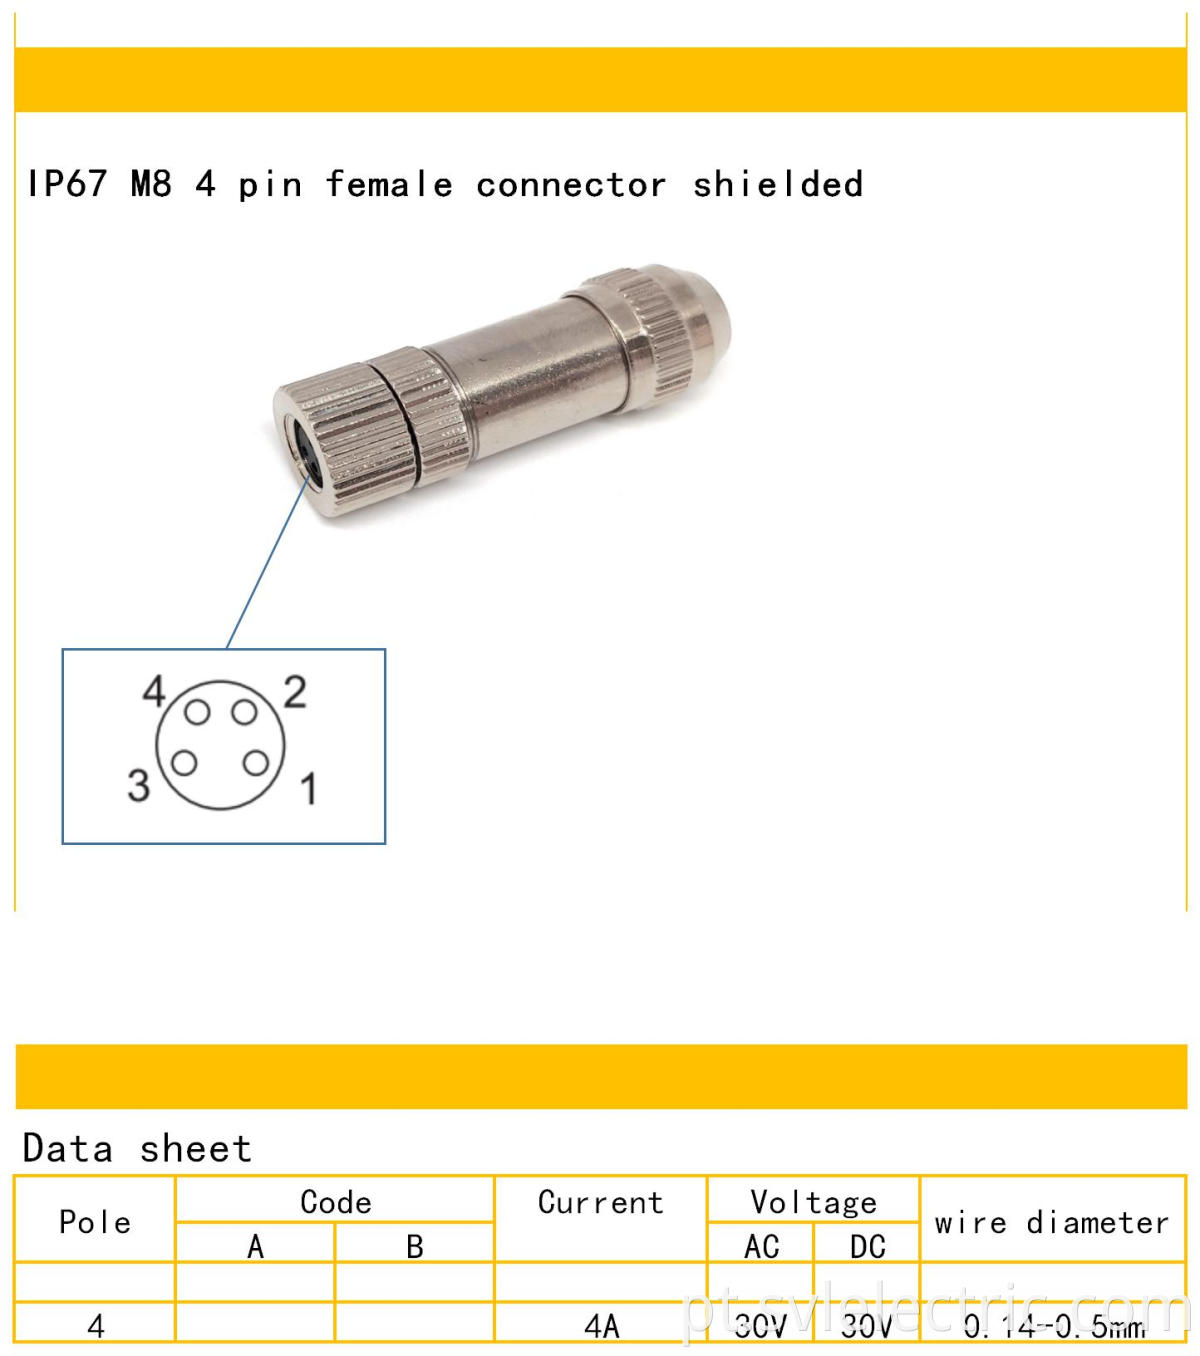 M8 4 pin female connector shielded specification